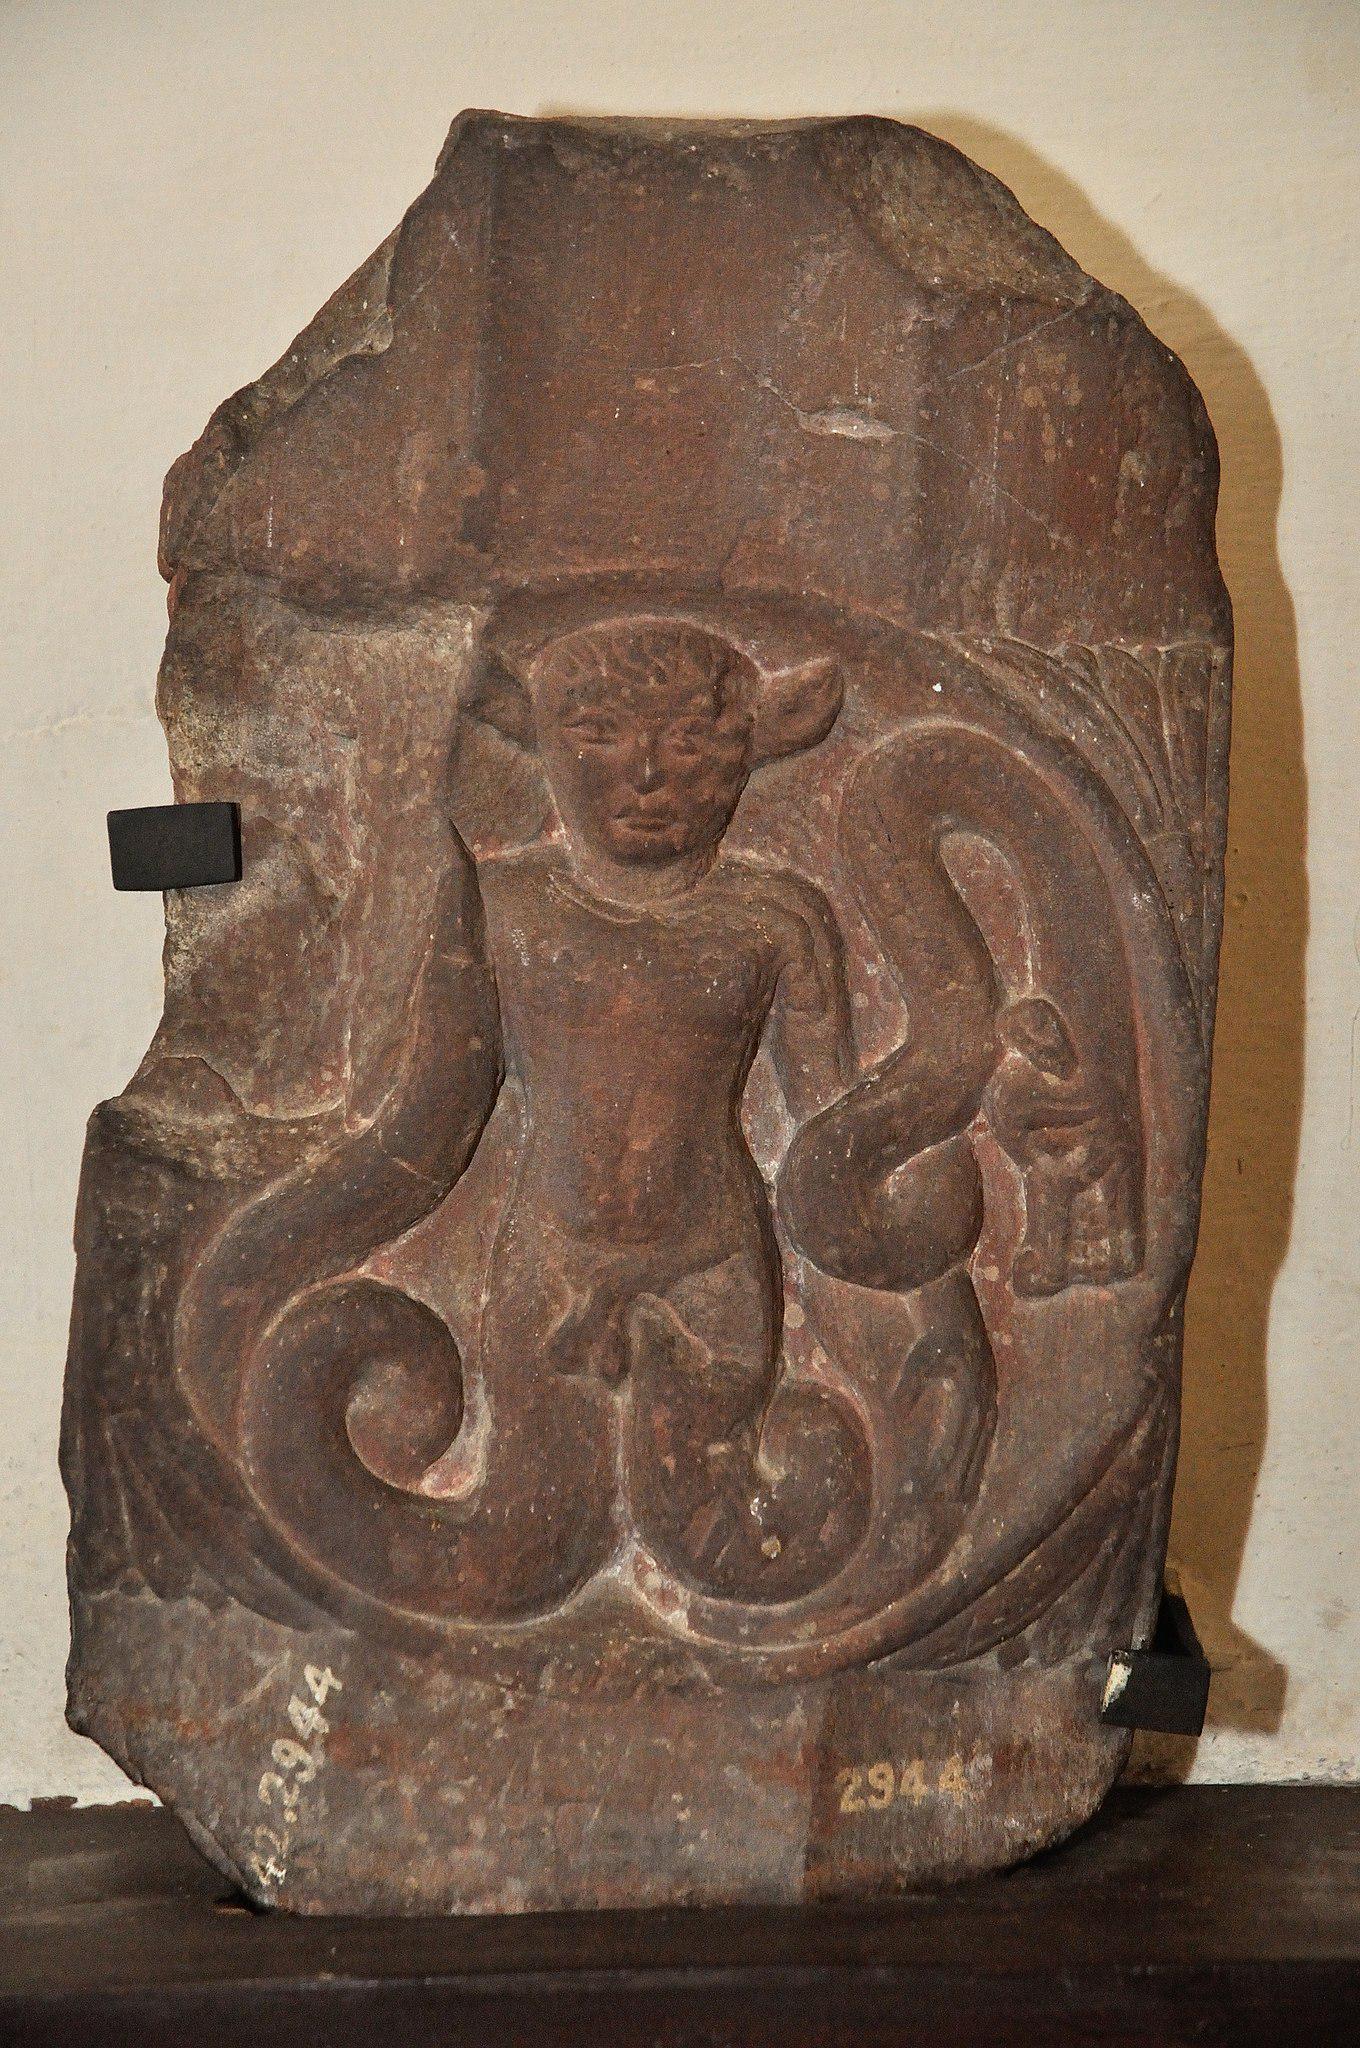 Vyala Yakshi, an indian version of the Greco-Roman Anguiped. 1st Century BCE. On display at Government Museum - Mathura, India.jpeg